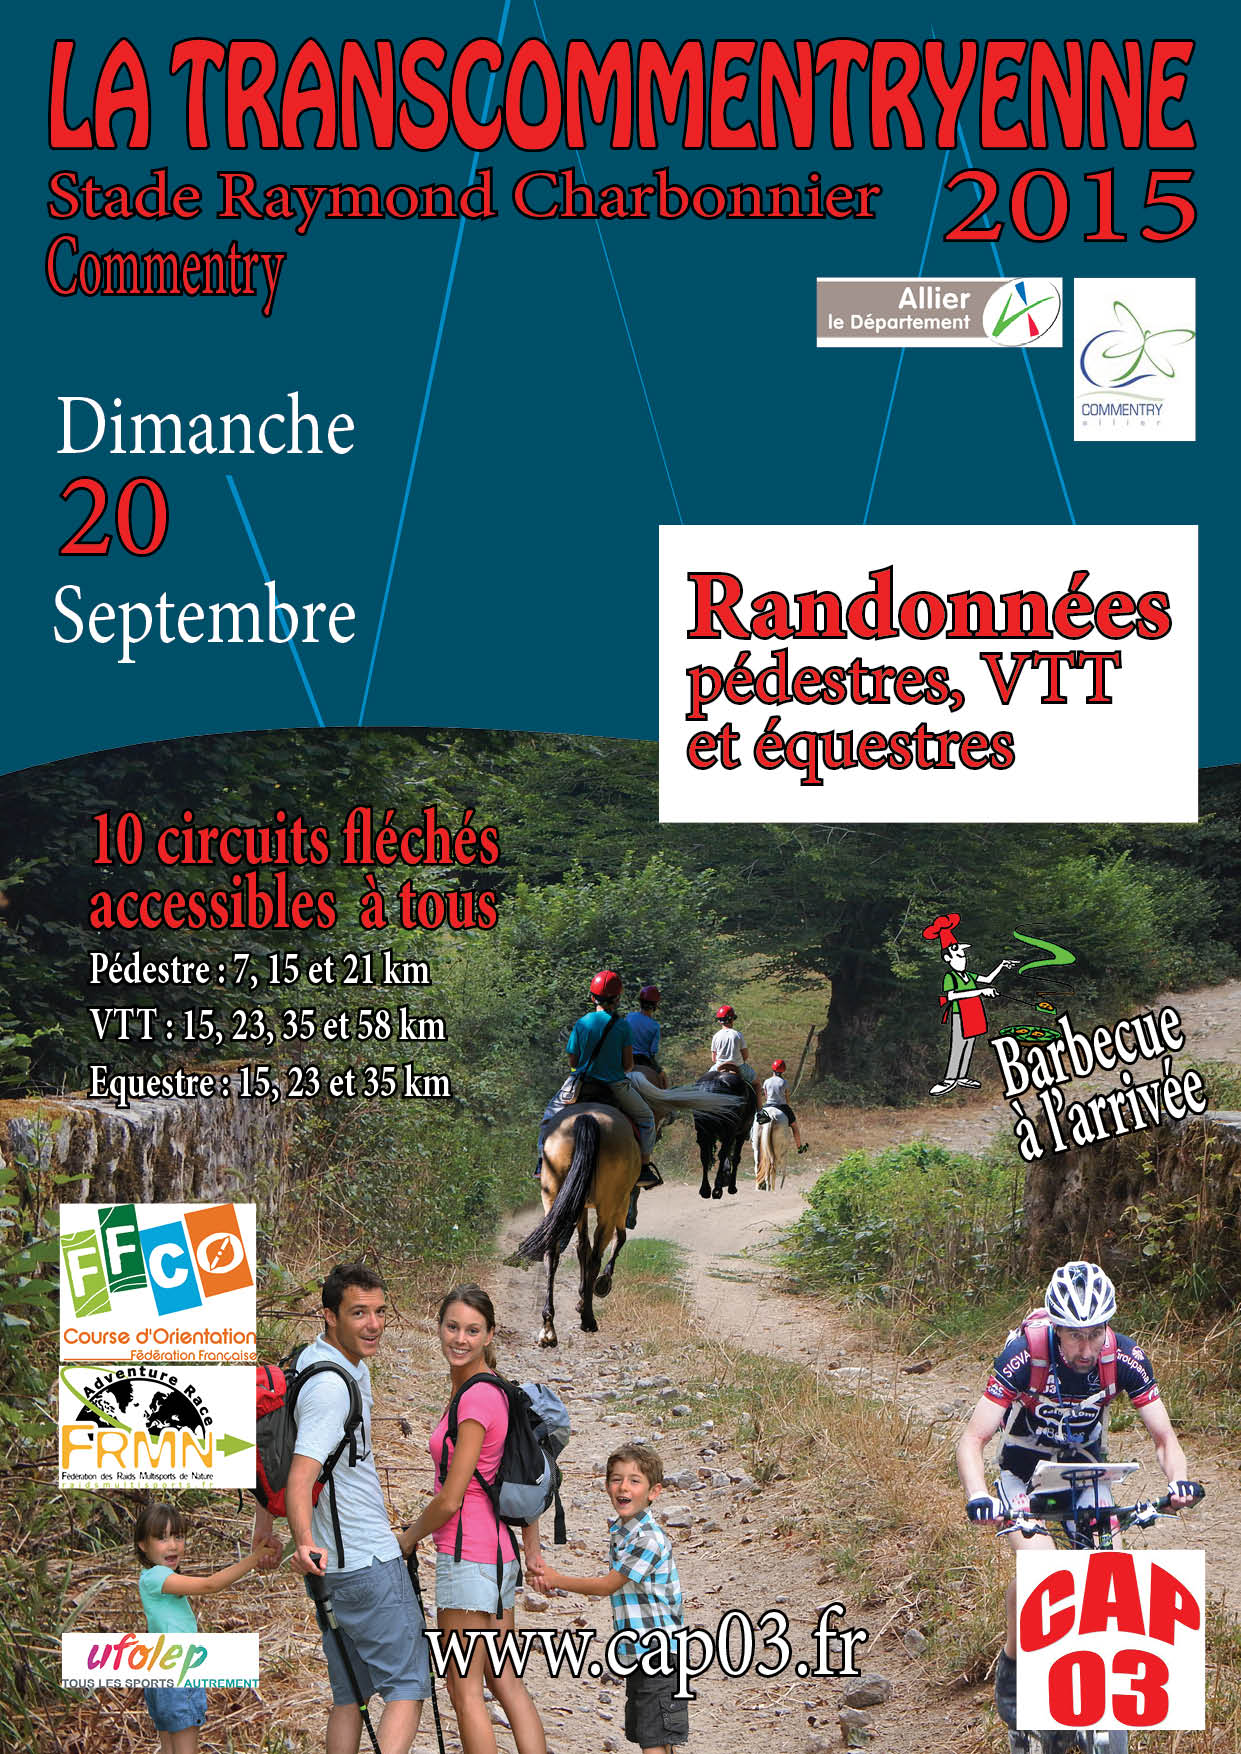 Affiche Transcommentryenne A4 2015